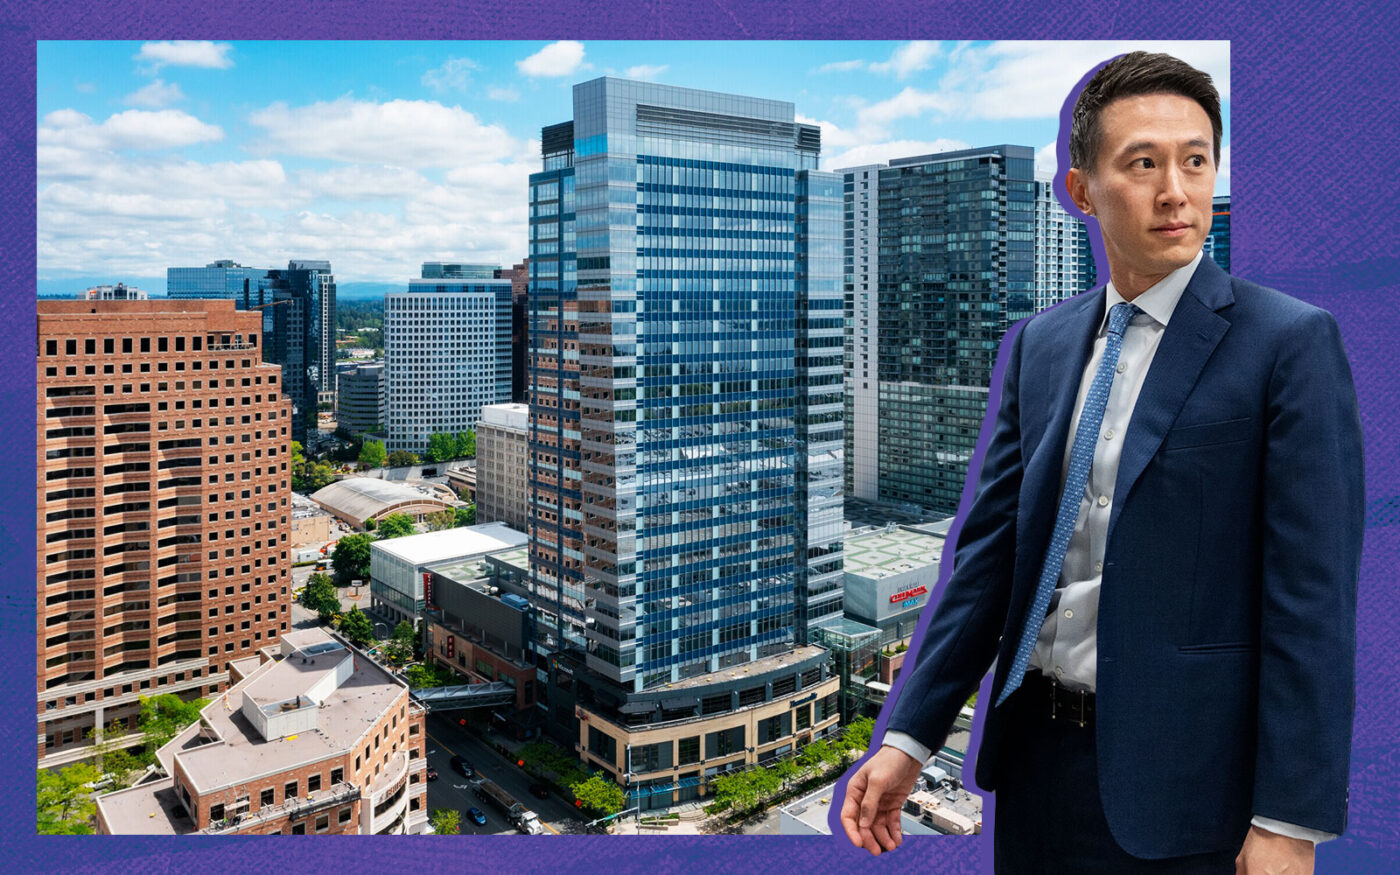 TikTok to Lease 132K sf of Offices in Downtown Bellevue